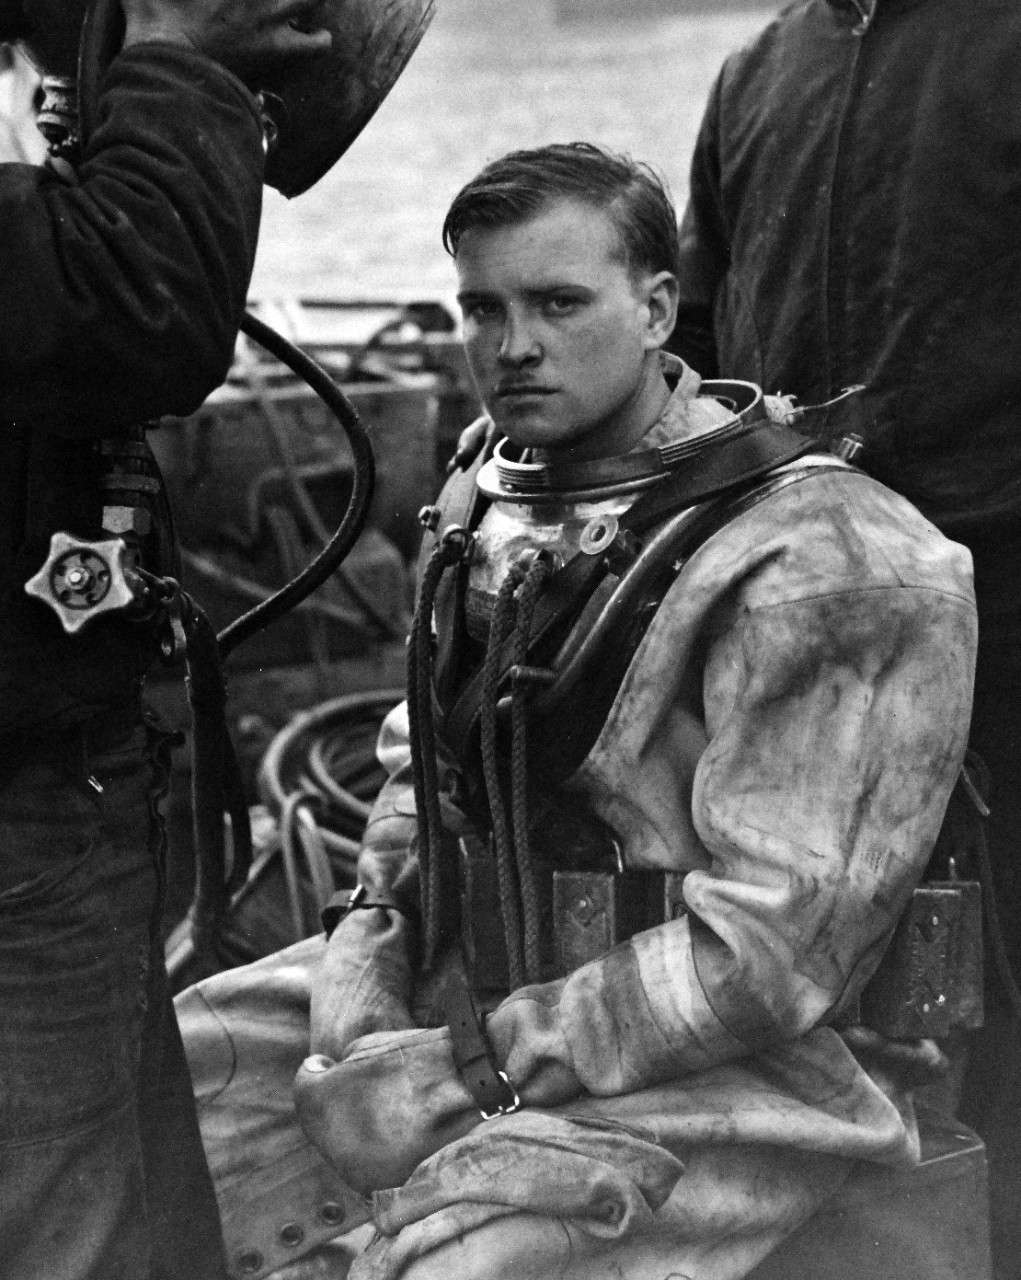 80-G-279824:  Montague Island, Gulf of Alaska, Alaska, 1945.   Salvage diver onboard.  Photographed by PhoM3/R.L. Willey, May 30, 1945.  U.S. Navy Photograph now in the collections of the National Archives.  (2016/01/19).